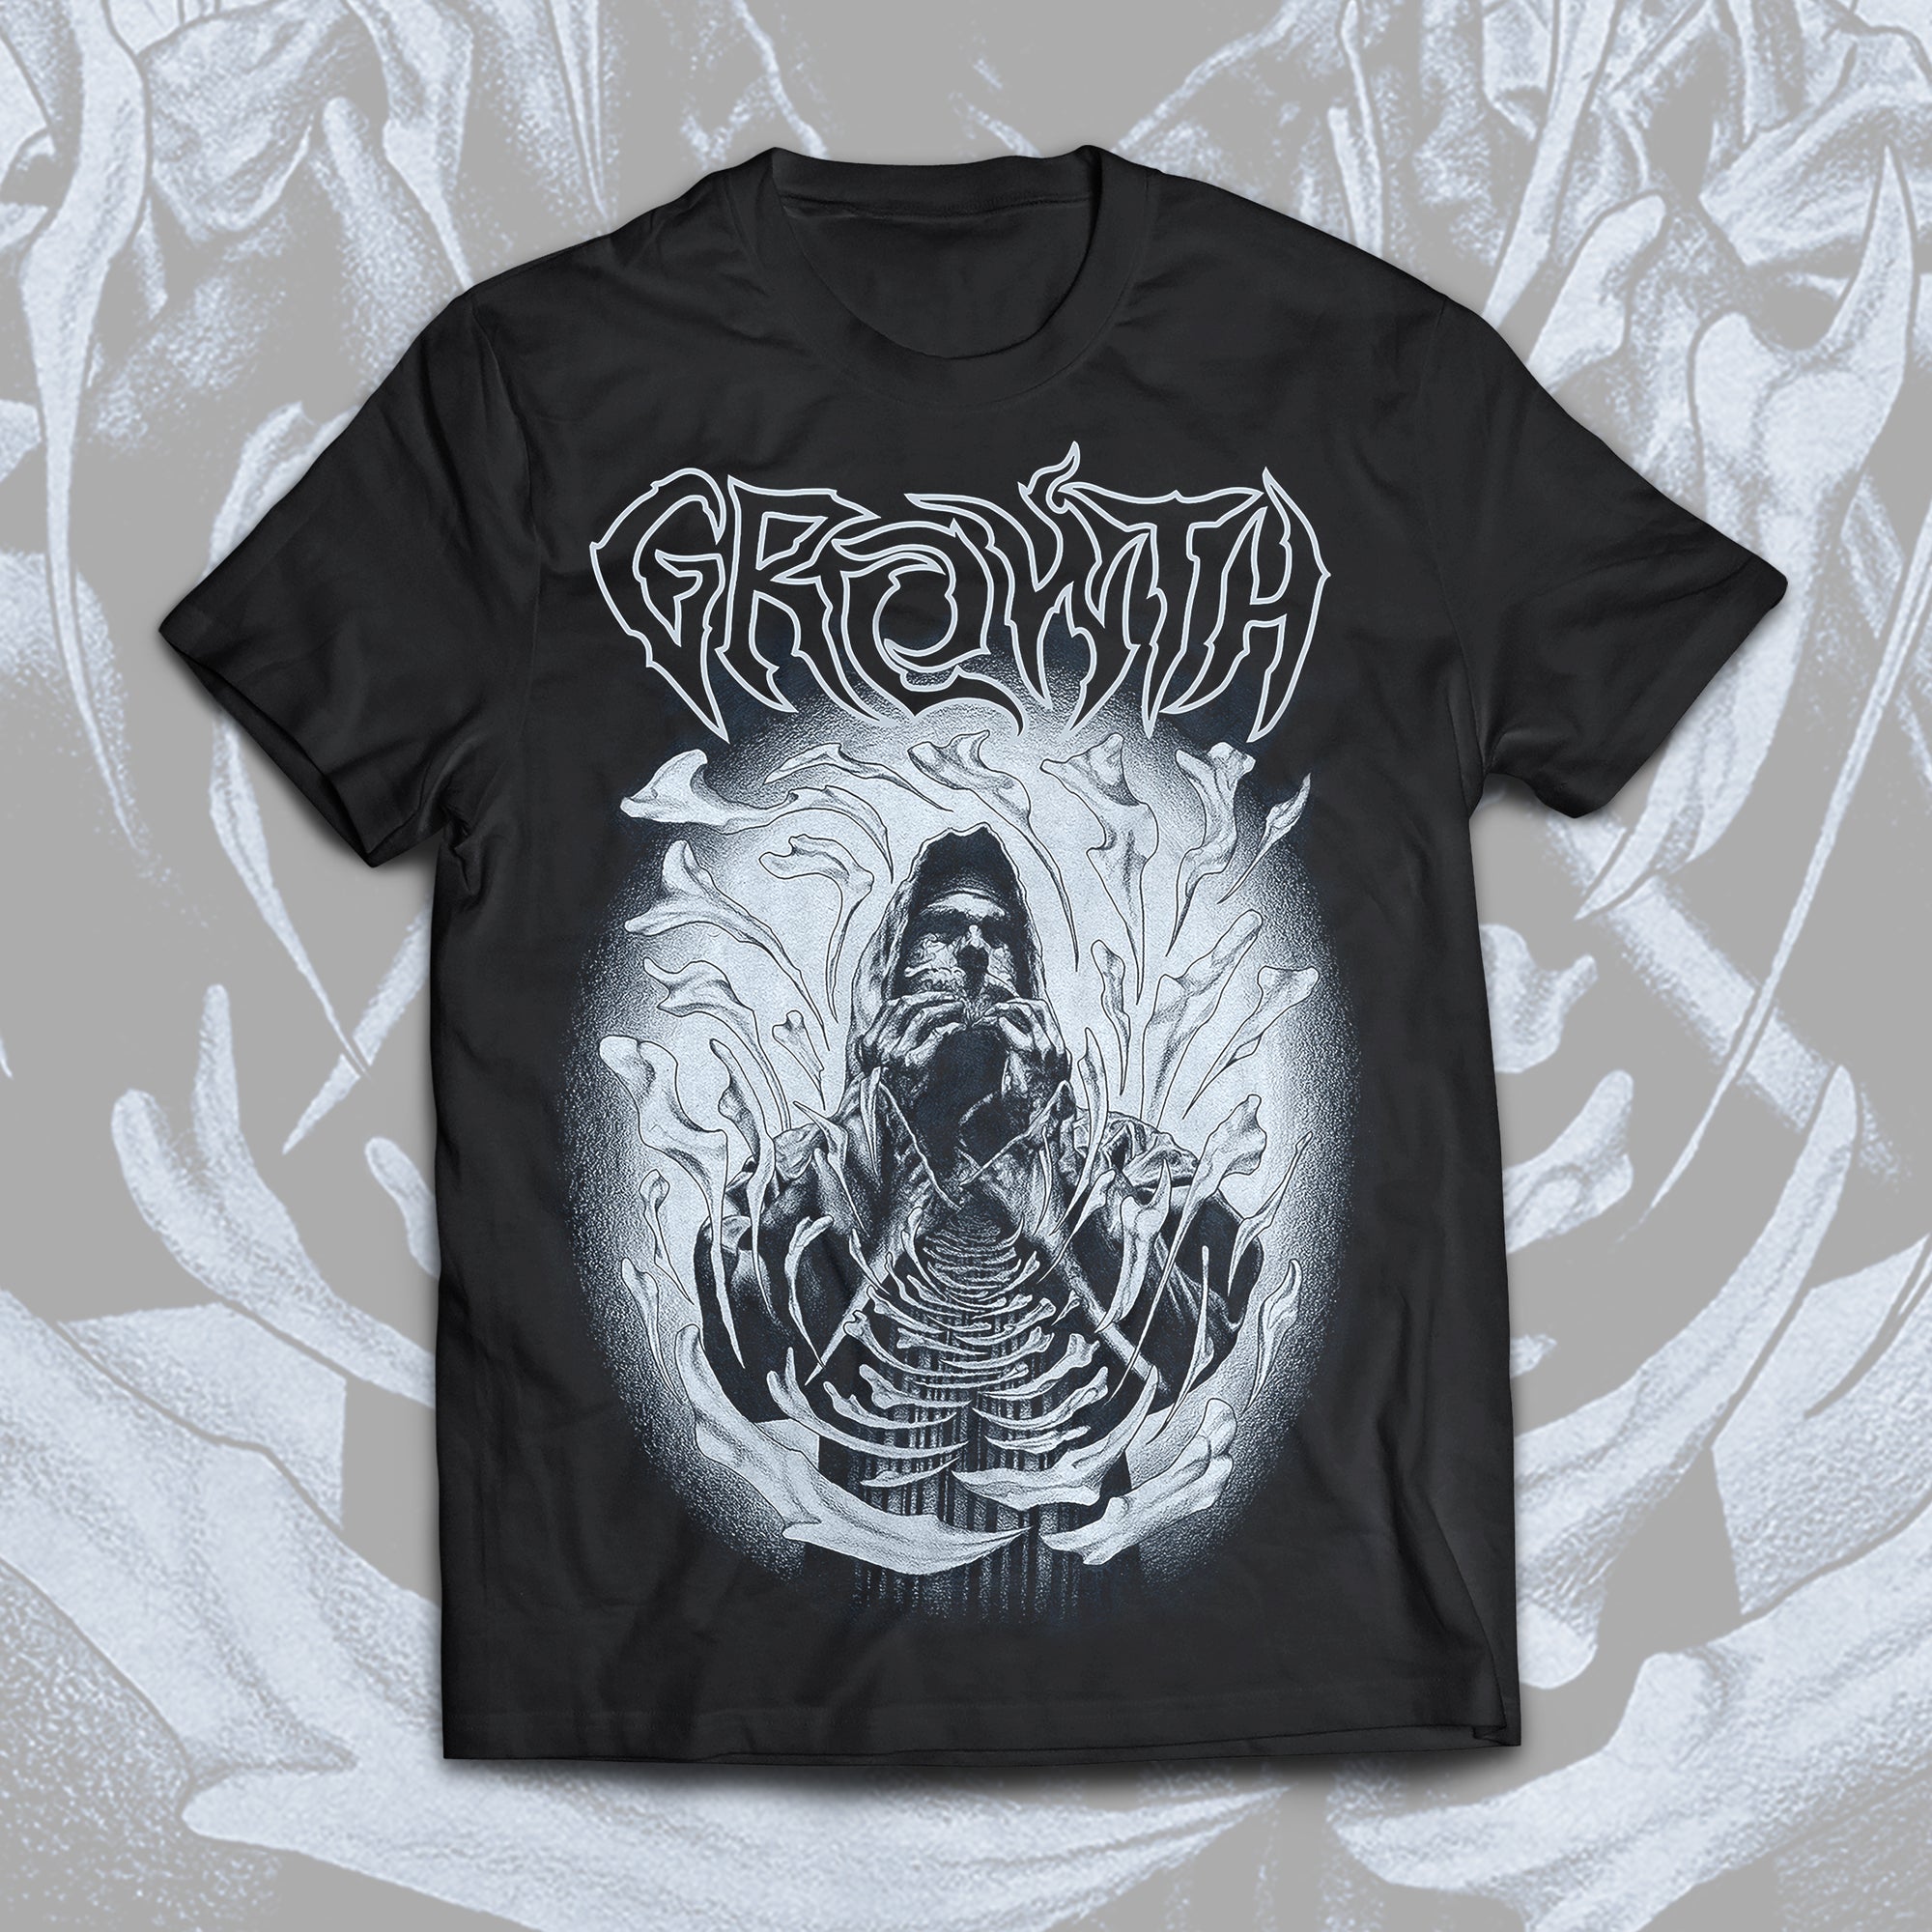 GROWTH // CIGARETTE BURNS T-SHIRT - Wild Thing Records